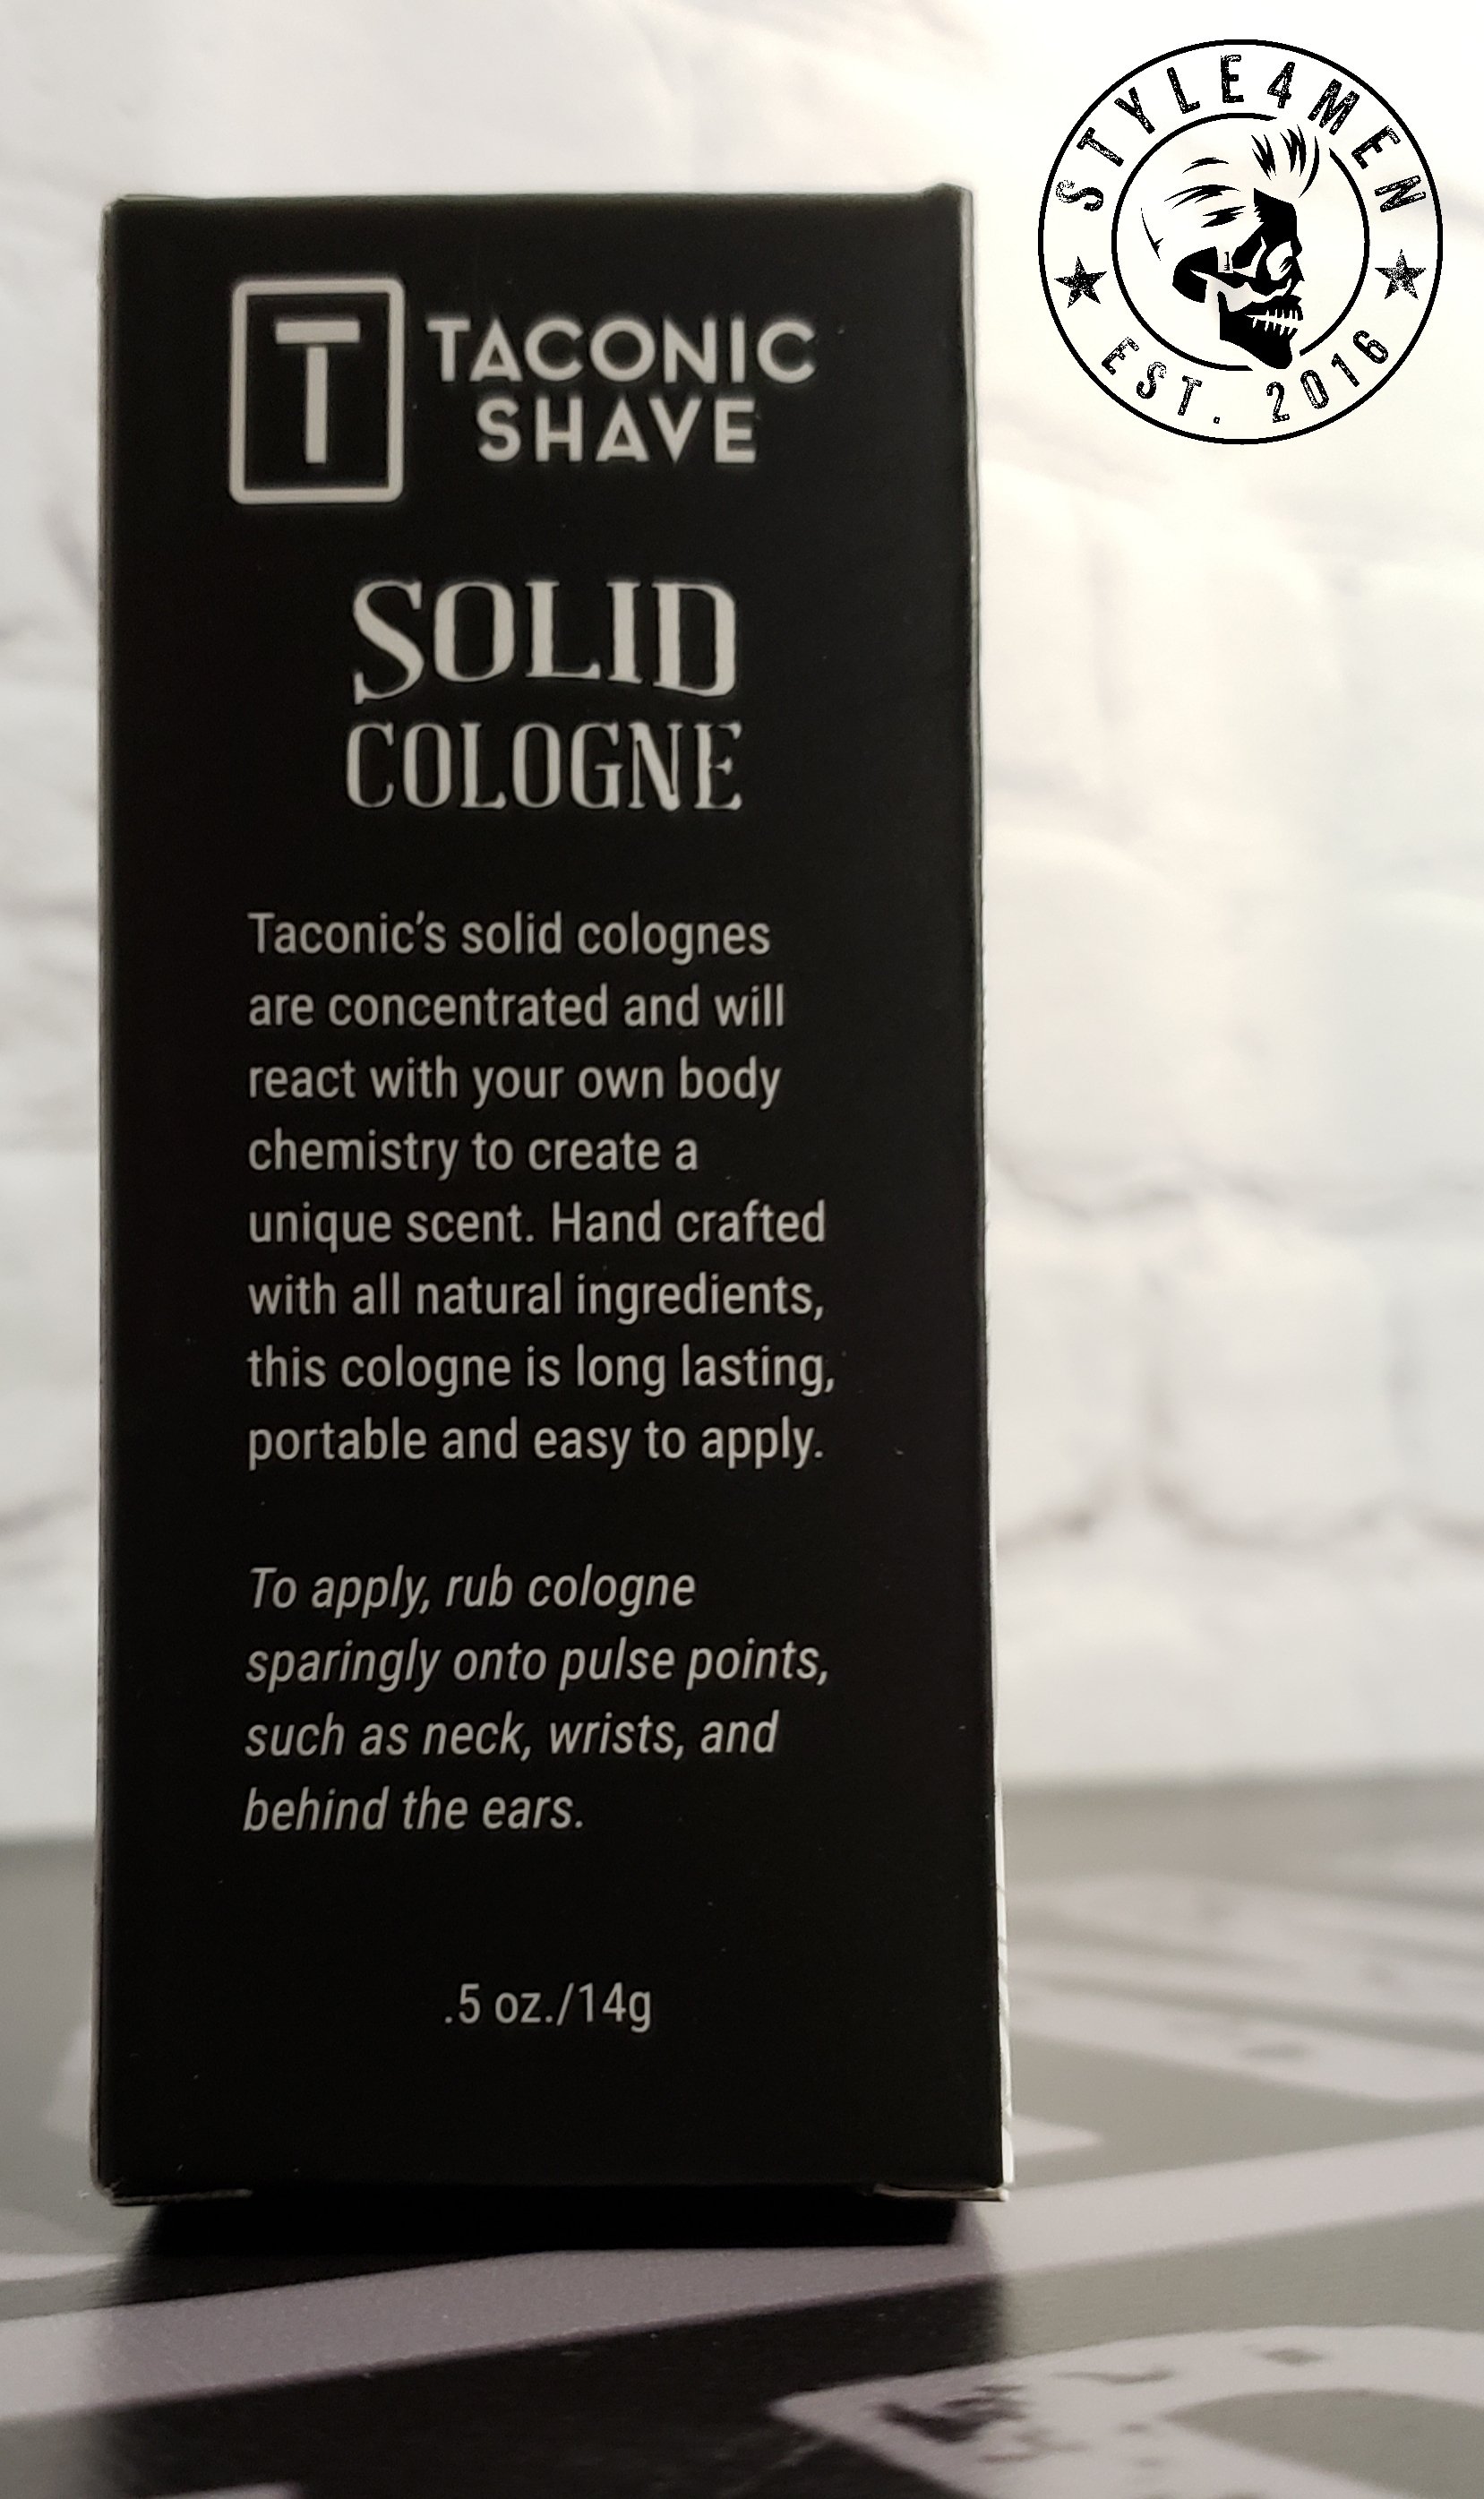 Taconic shave Solid Colognes